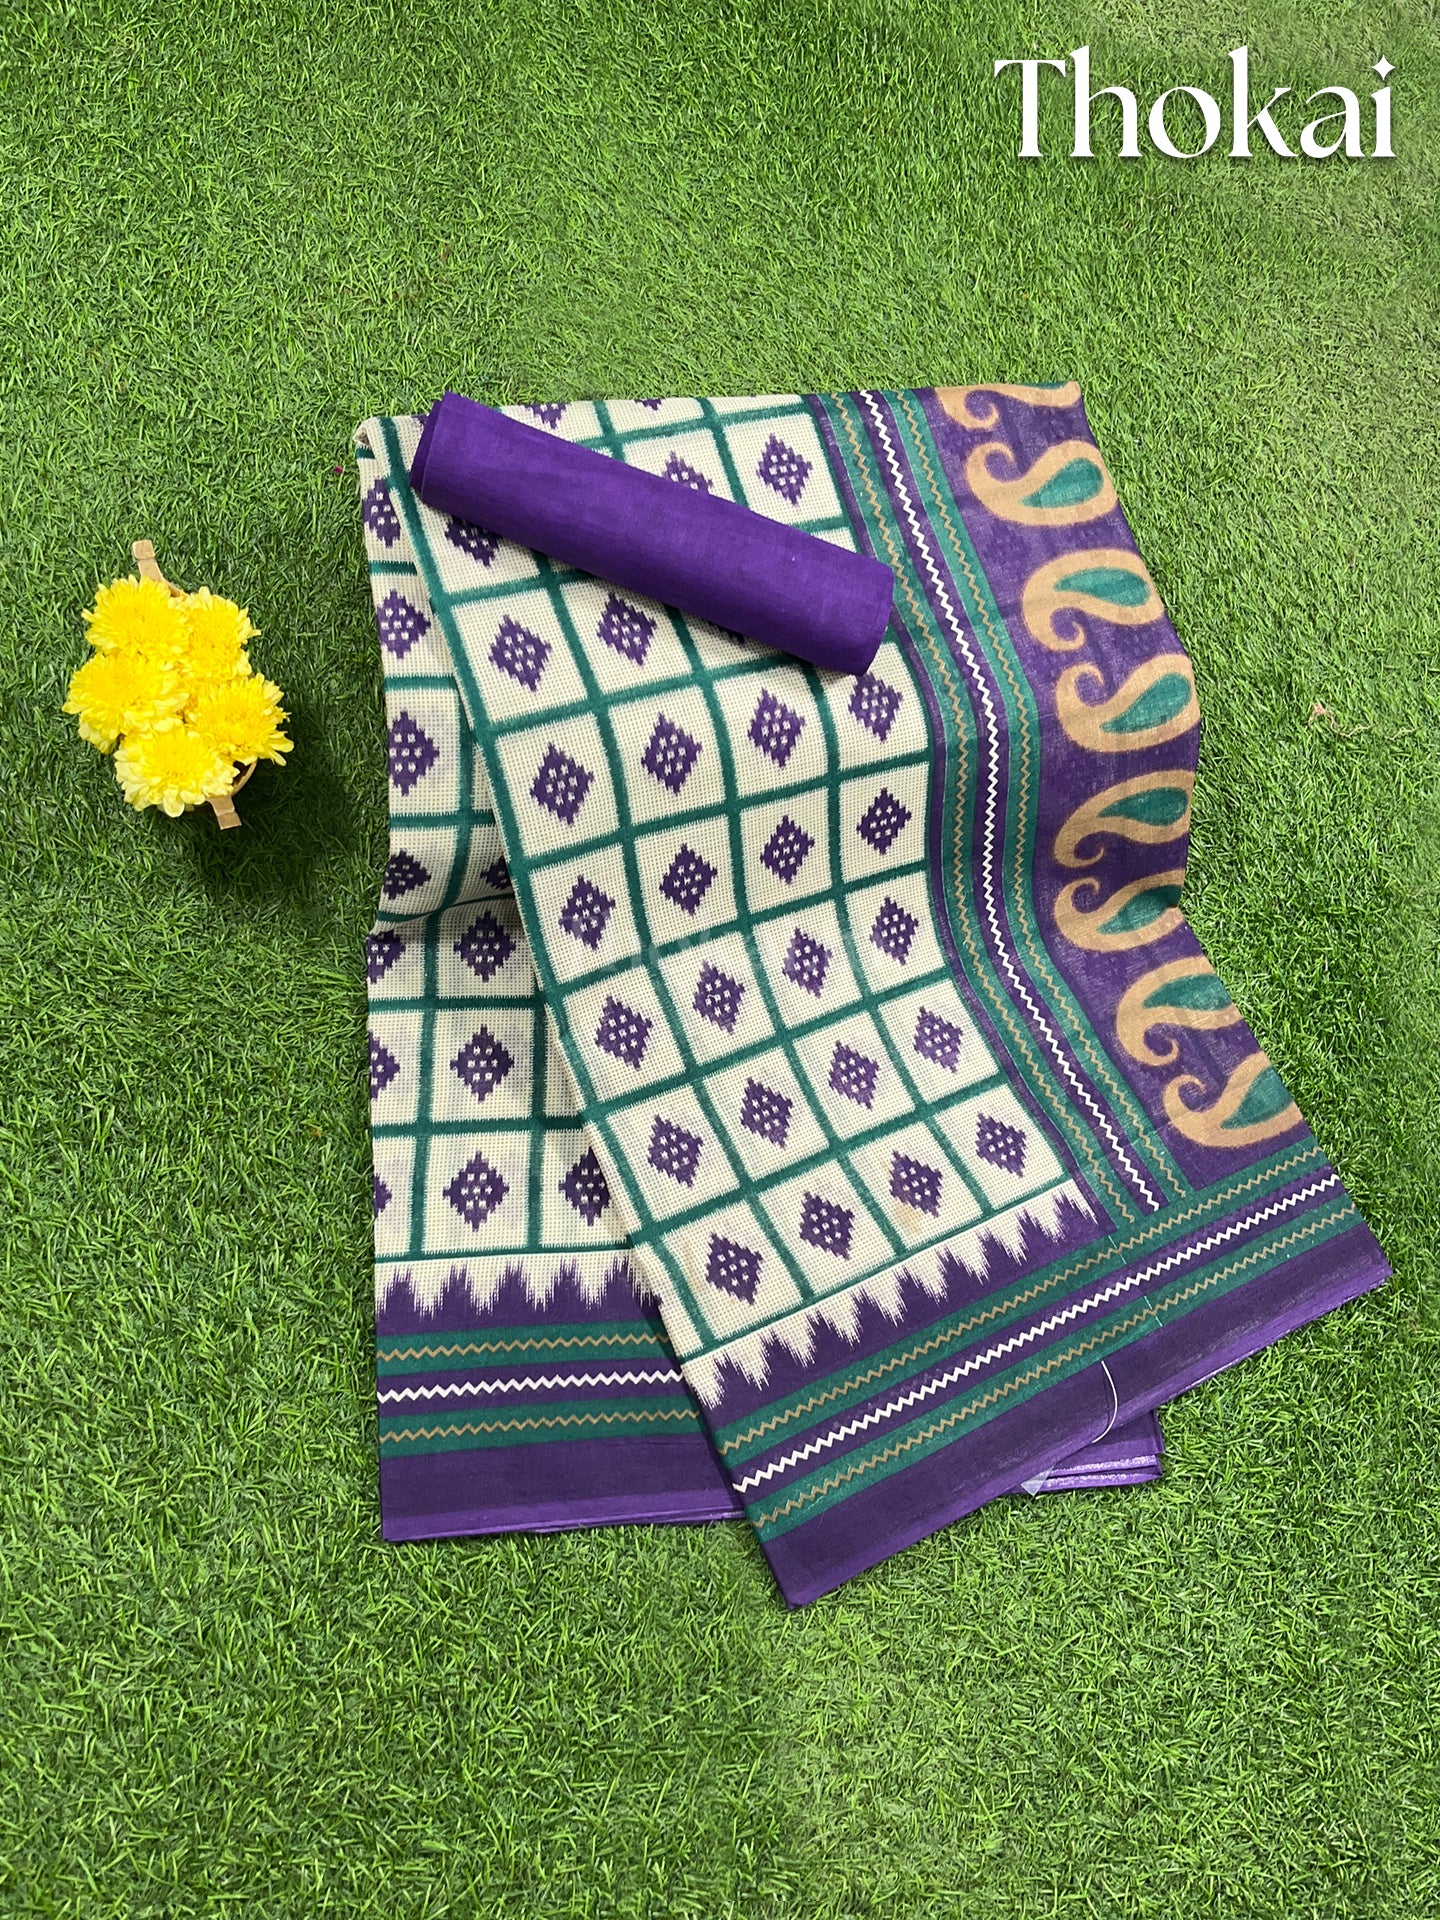 Milky white and violet printed cotton saree